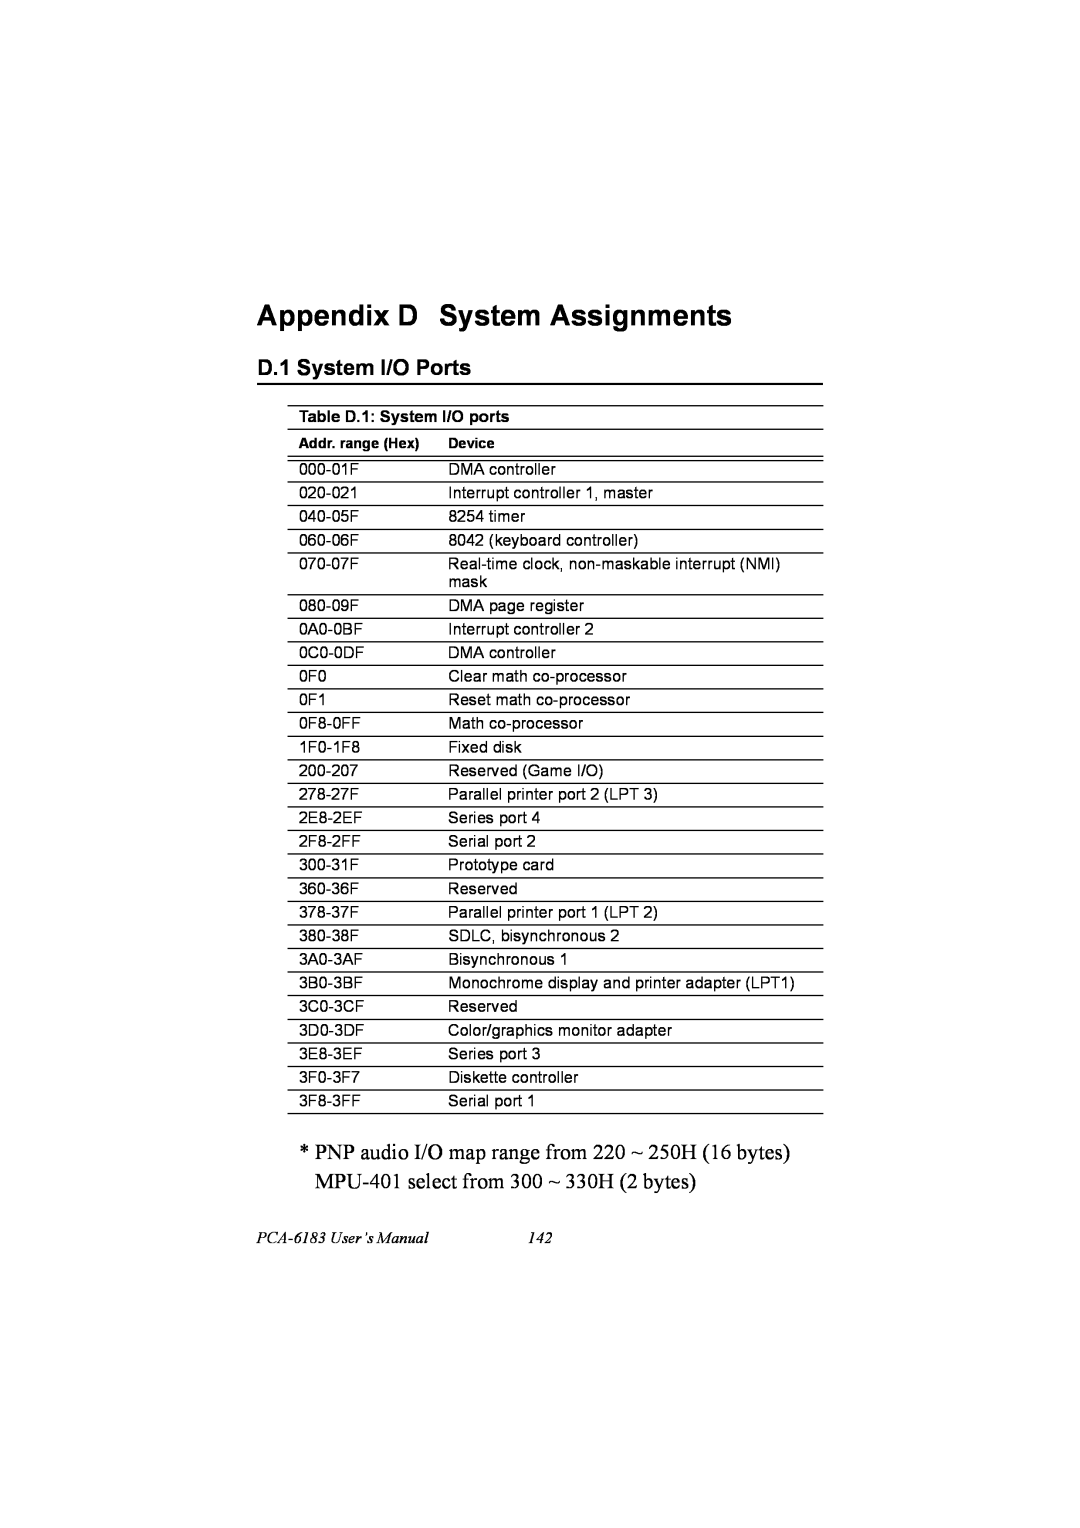 IBM PCM-9575 Appendix D System Assignments, D.1 System I/O Ports, Table D.1 System I/O ports, PCA-6183 User’s Manual 